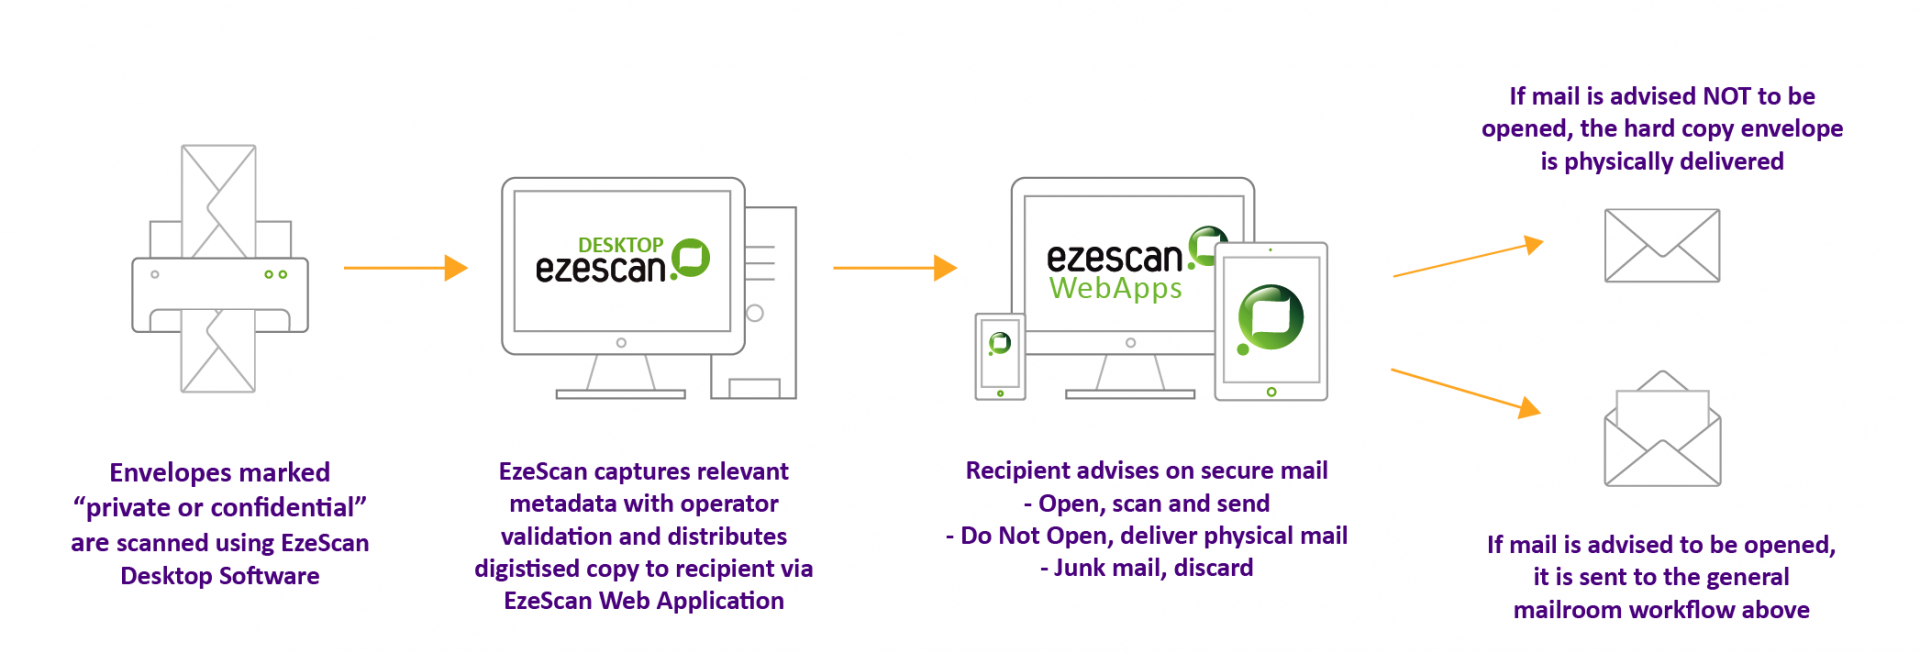 EzeScan Digital Mailroom Workflow - Secure Mail.png